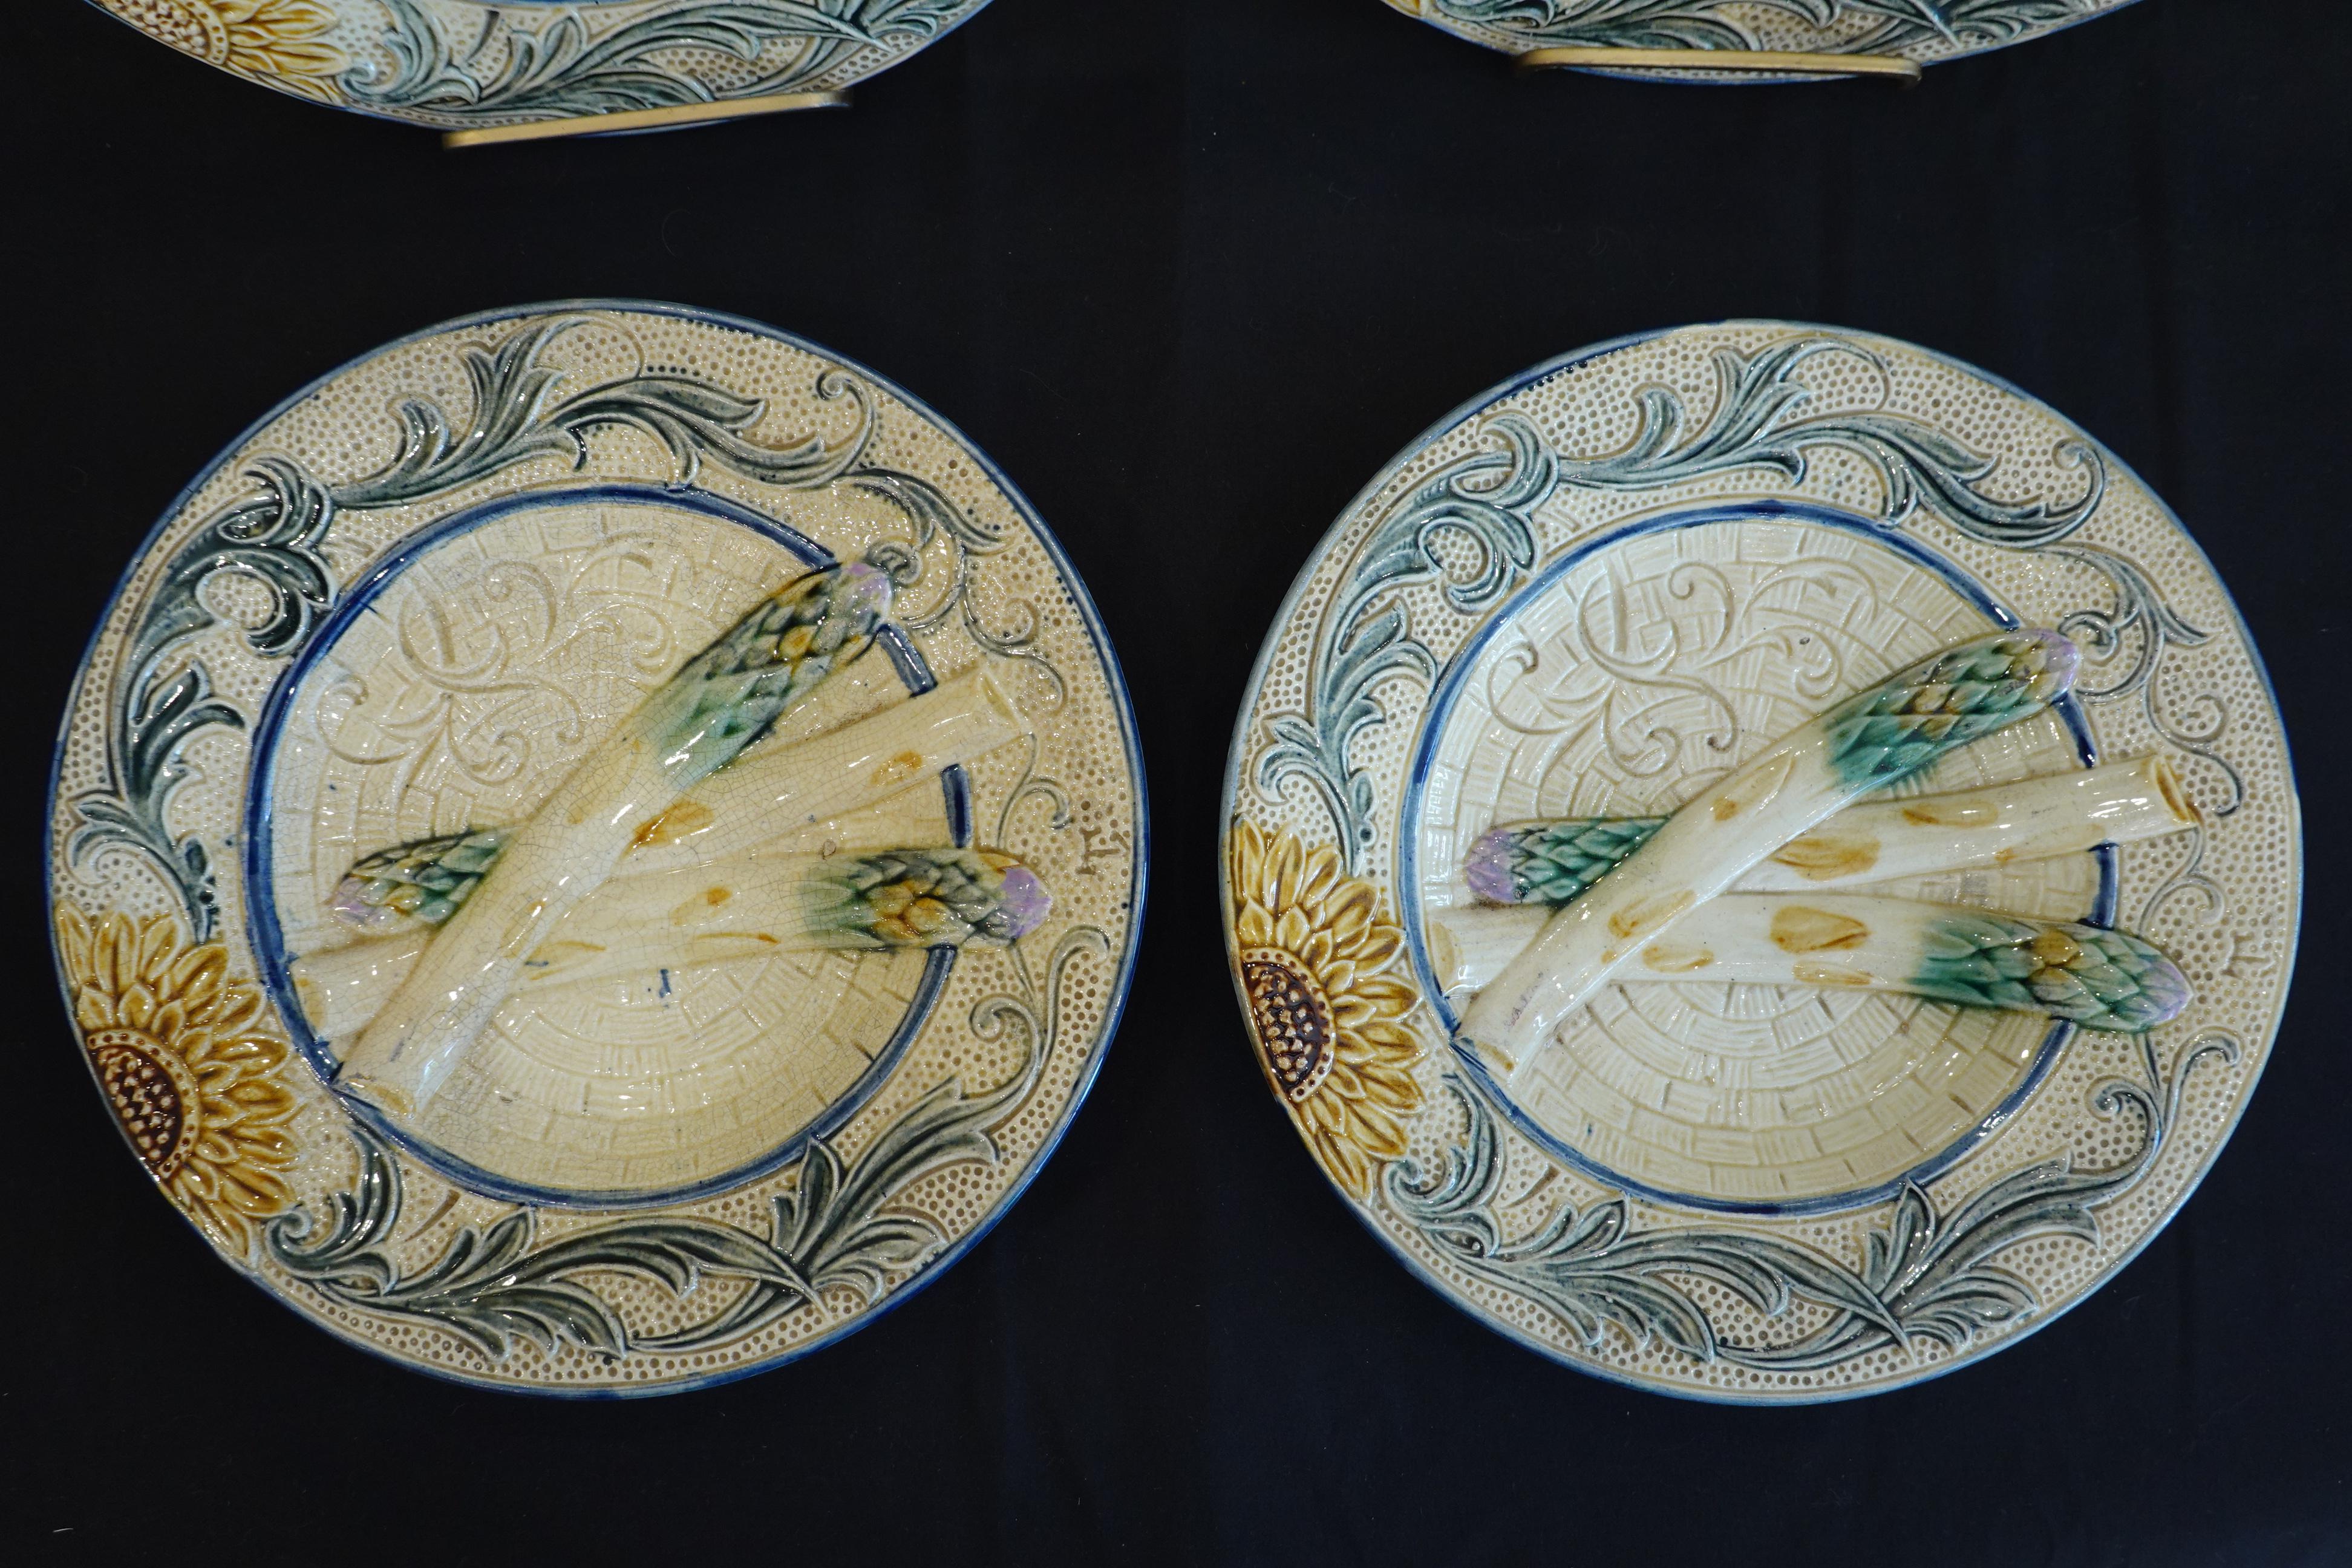 Set of four 19th century Majolica asparagus plates. Each plate features three molded asparagus spears with a sunflower and vines encircling the perimeter. The plates are unmarked, but some have an impressed letter and/or underglaze mark on the